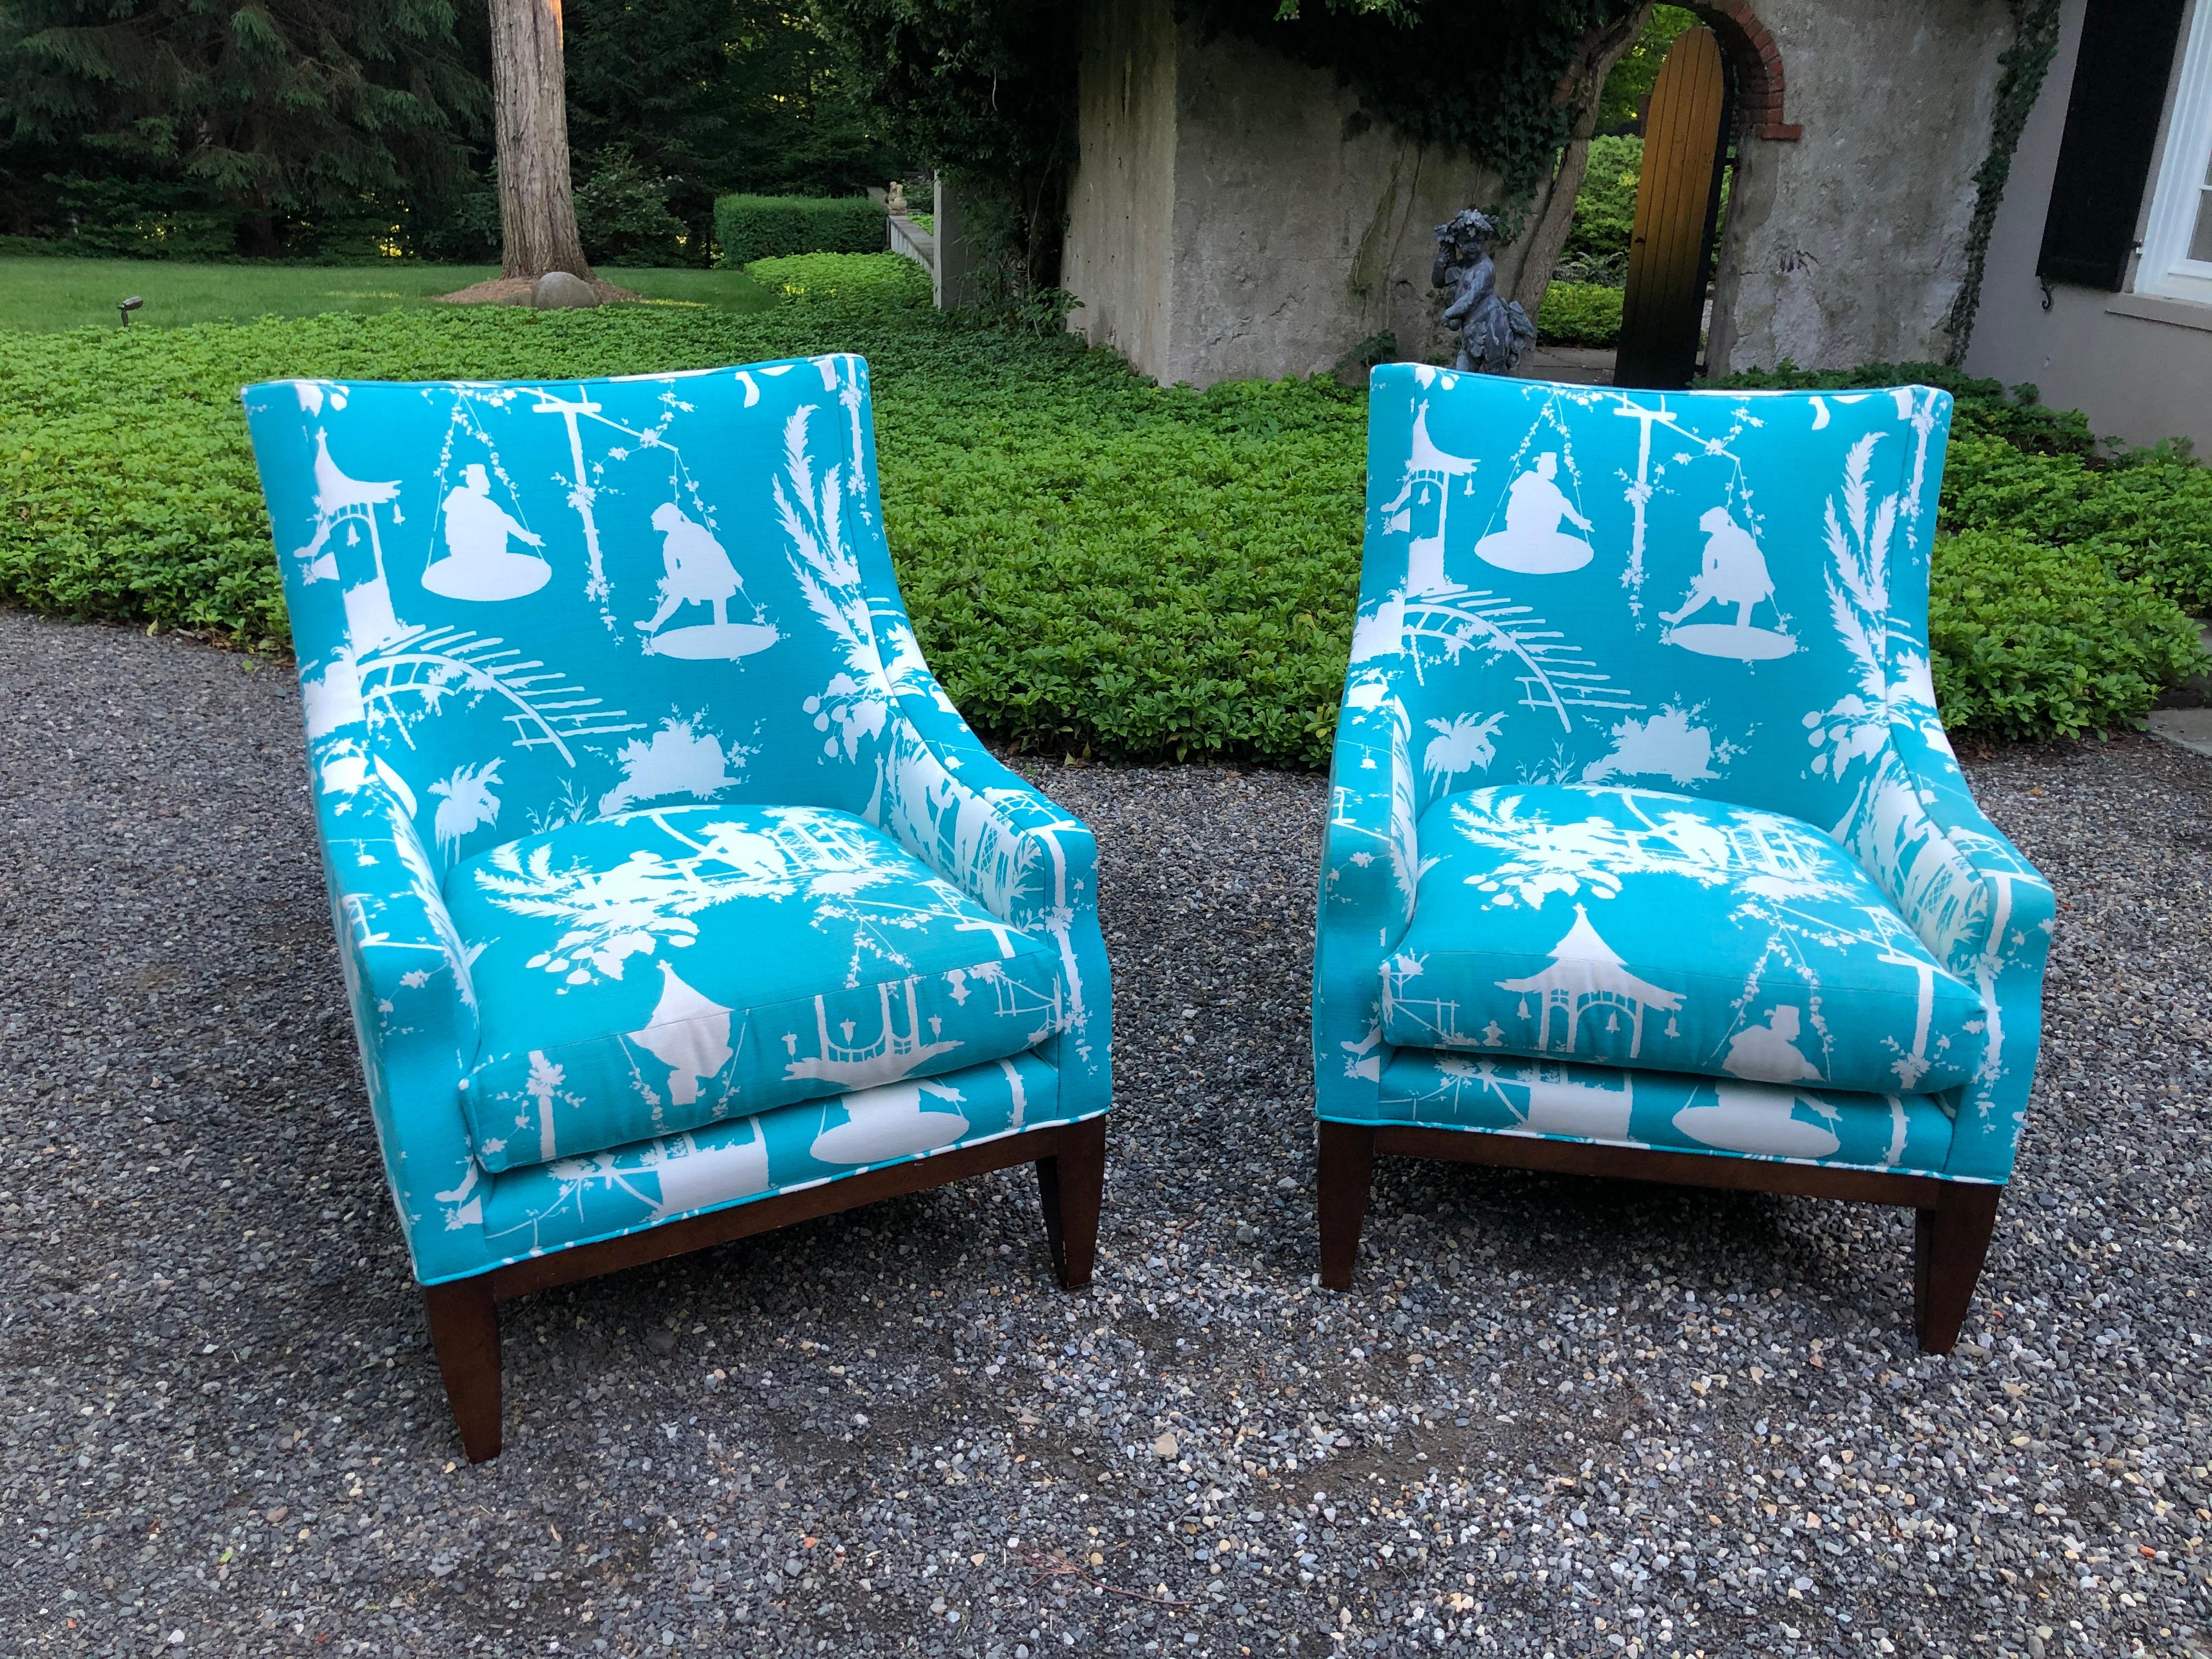 Fabulous pair of fireside chairs by Lee Jofa. Upholstered in Thibaut’s South Sea fabric having a curved back and mahogany legs. They are quite heavy and extremely comfortable. Chairs have been professionally cleaned and are in excellent condition.